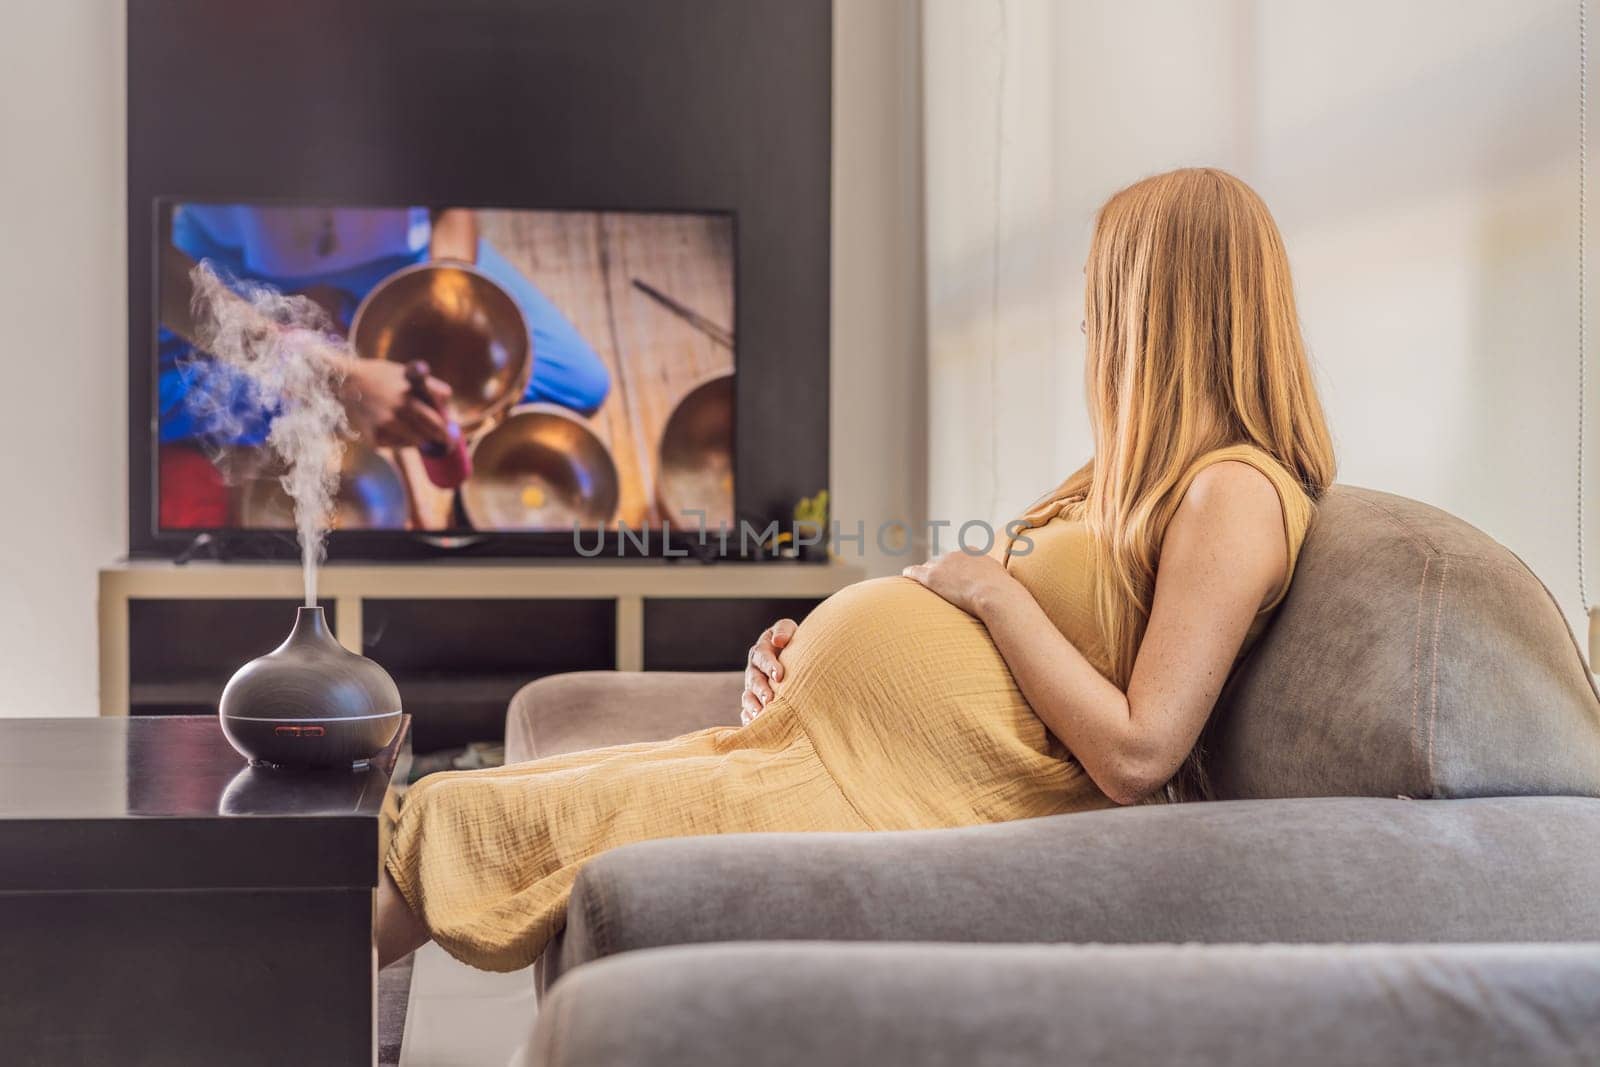 A blissful pregnant woman immerses in relaxation, savoring the soothing aroma from a diffuser while indulging in a calming TV video, embracing tranquility during her pregnant journey.